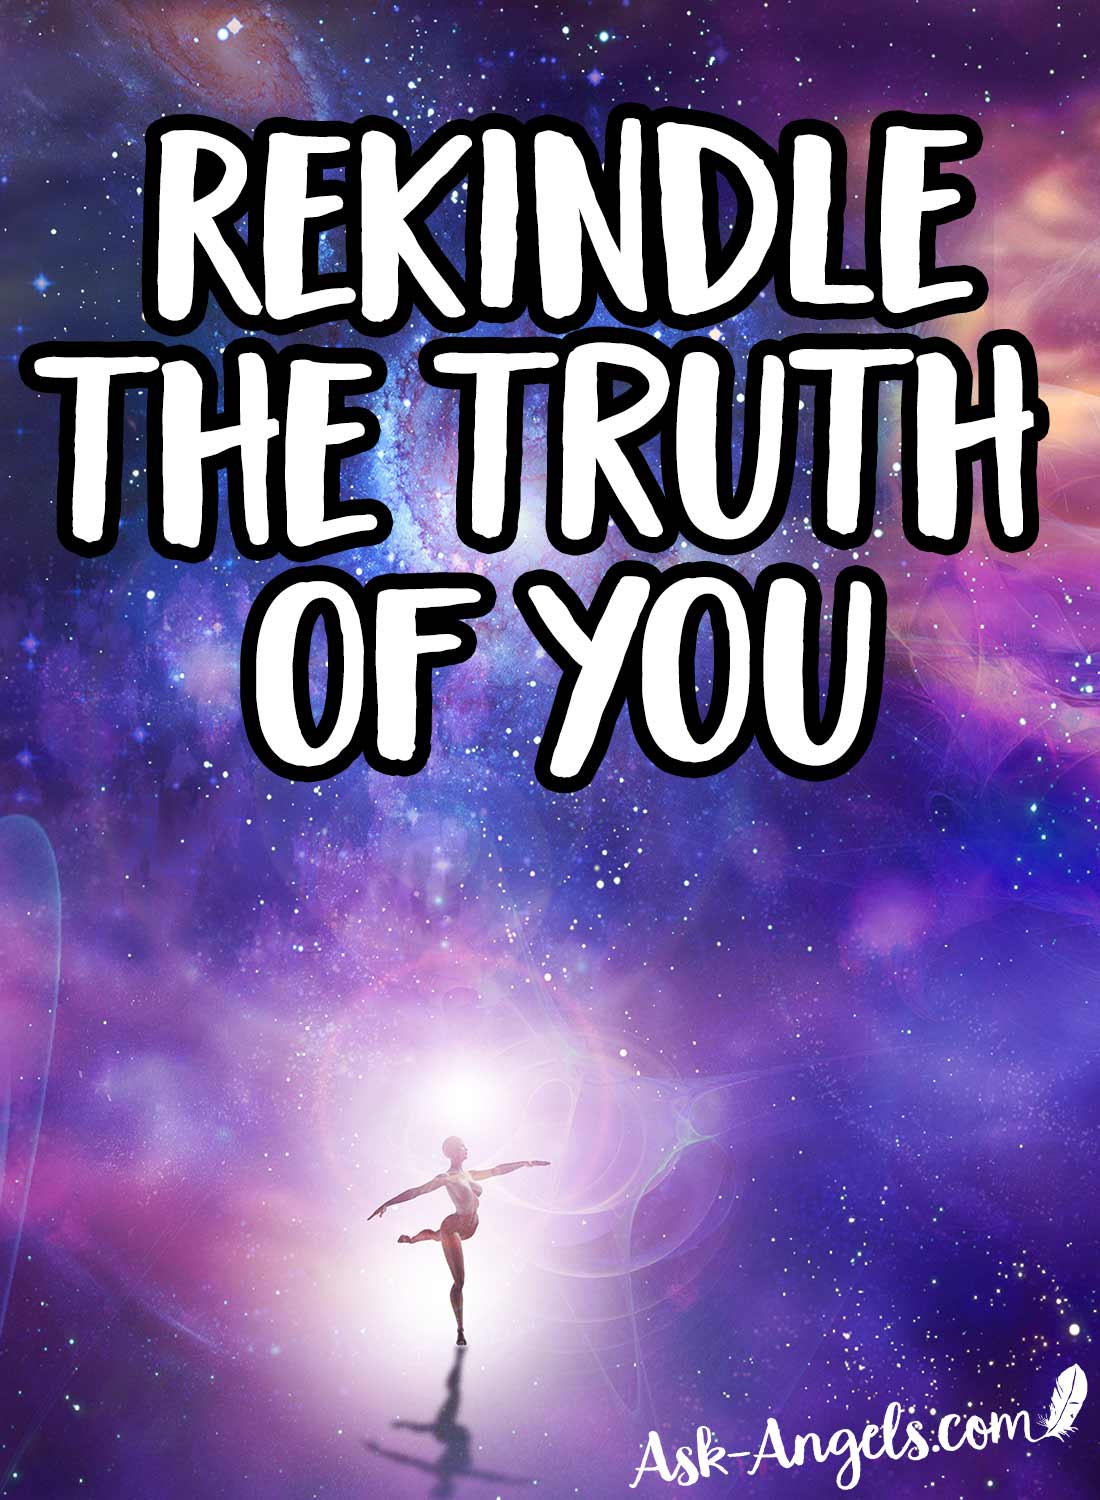 Rekindle the Truth of You